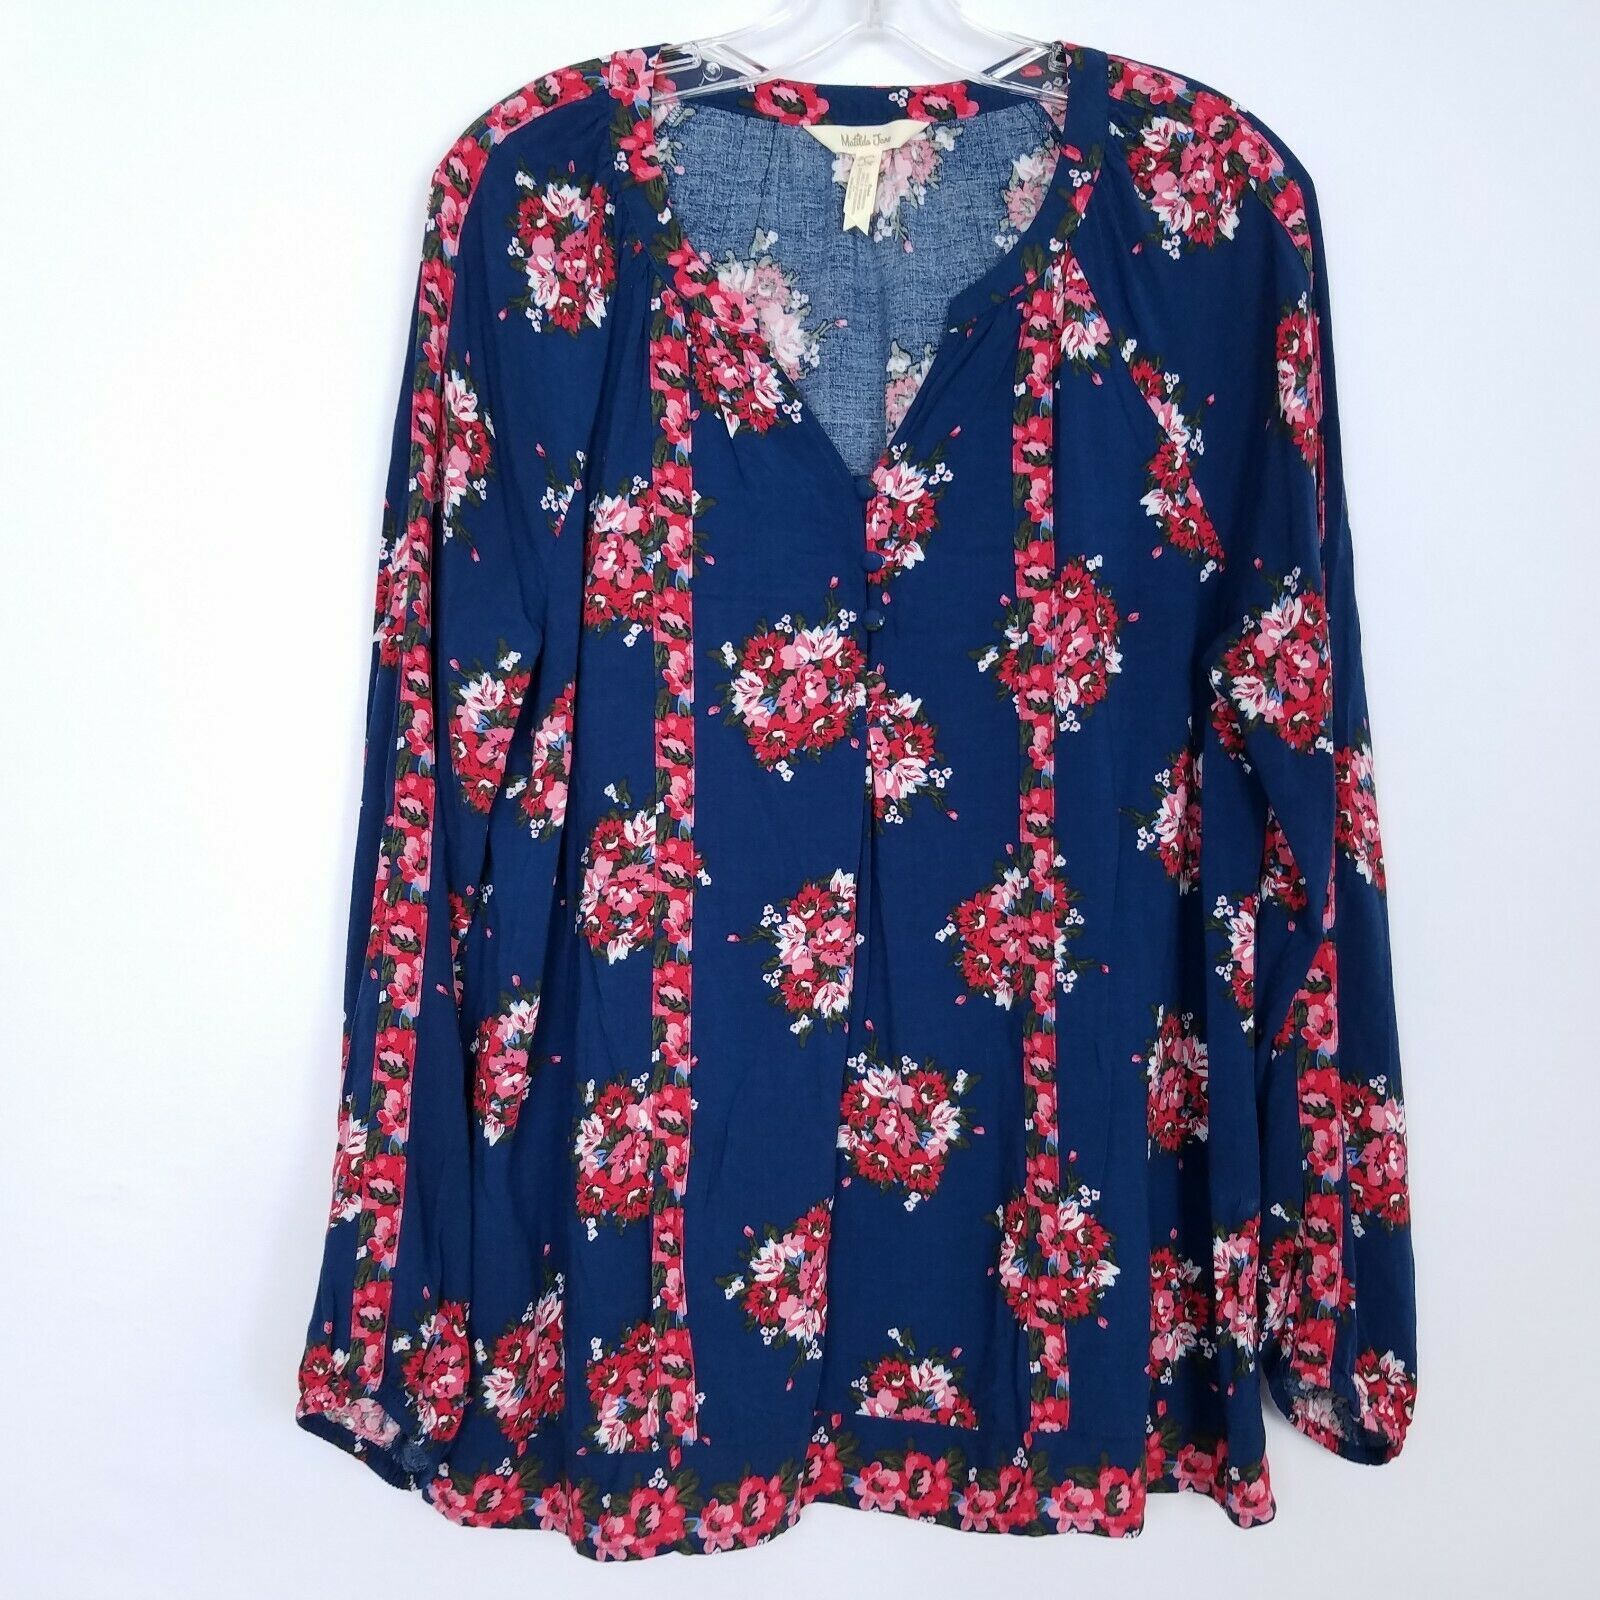 MATILDA JANE long sleeve tunic top blouse floral red blue y-neck women ...